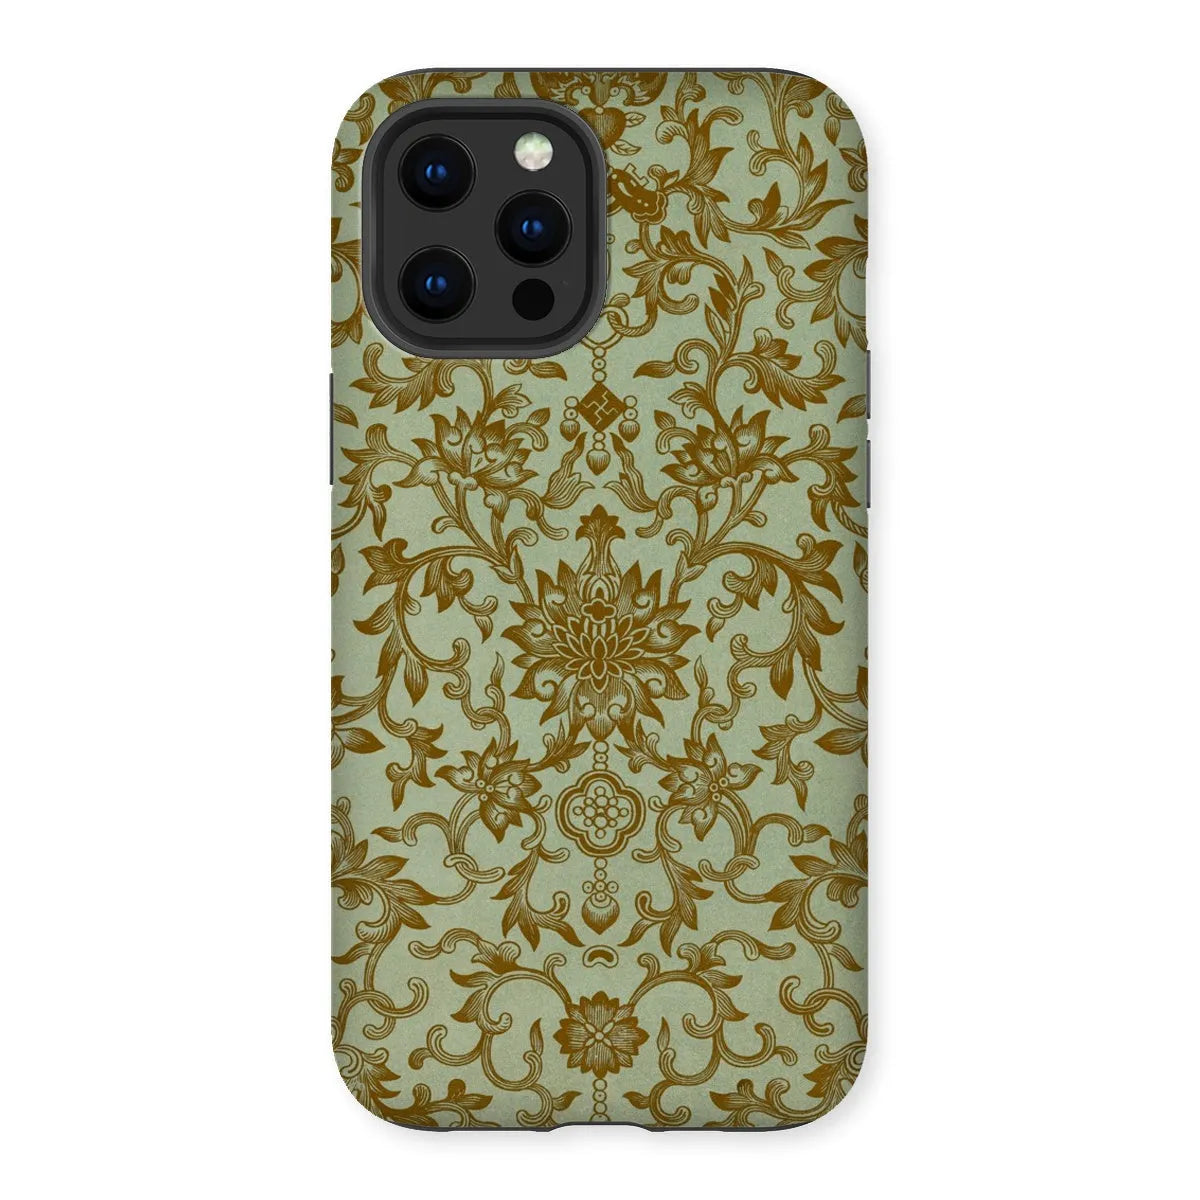 Earthy Chinese Floral Art Pattern Phone Case - Owen Jones - Iphone 12 Pro Max / Matte - Mobile Phone Cases - Aesthetic